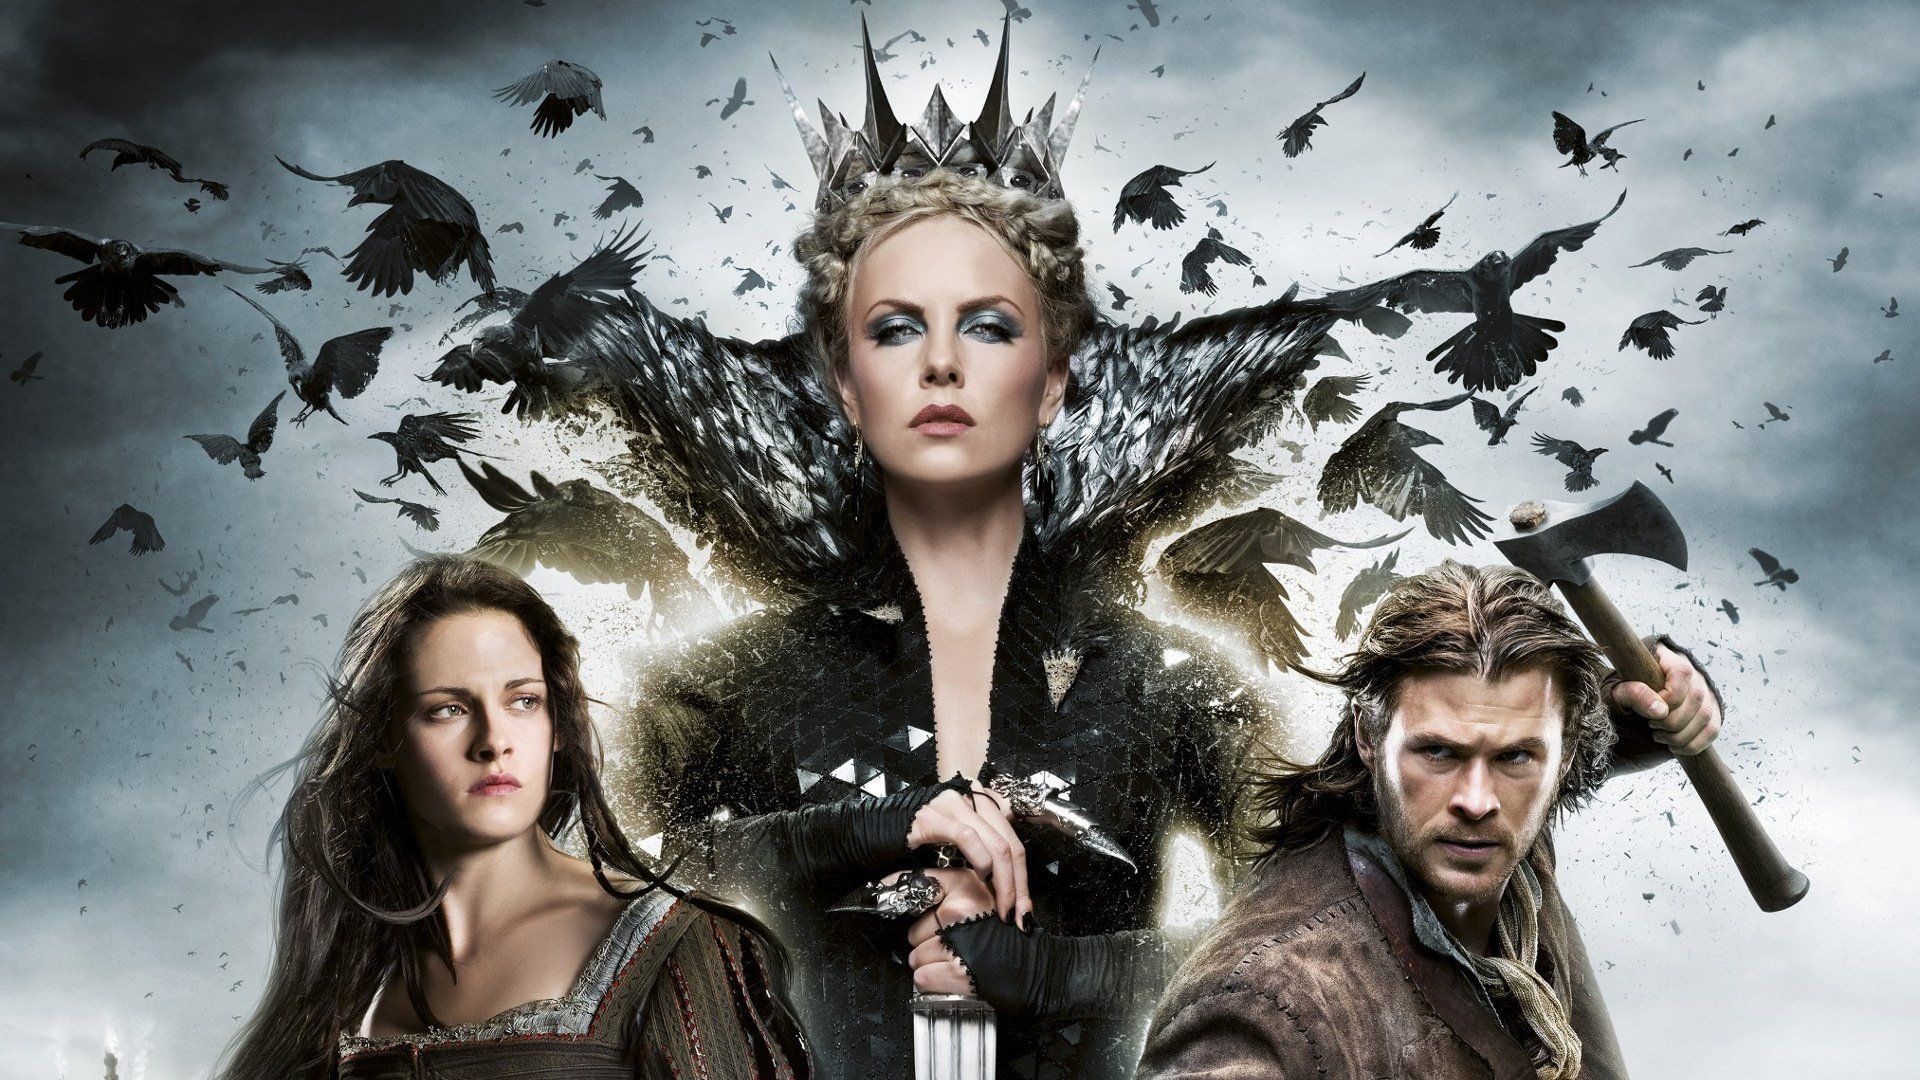 Snow White and the Huntsman, Movie wallpapers, Snow White, Backgrounds, 1920x1080 Full HD Desktop